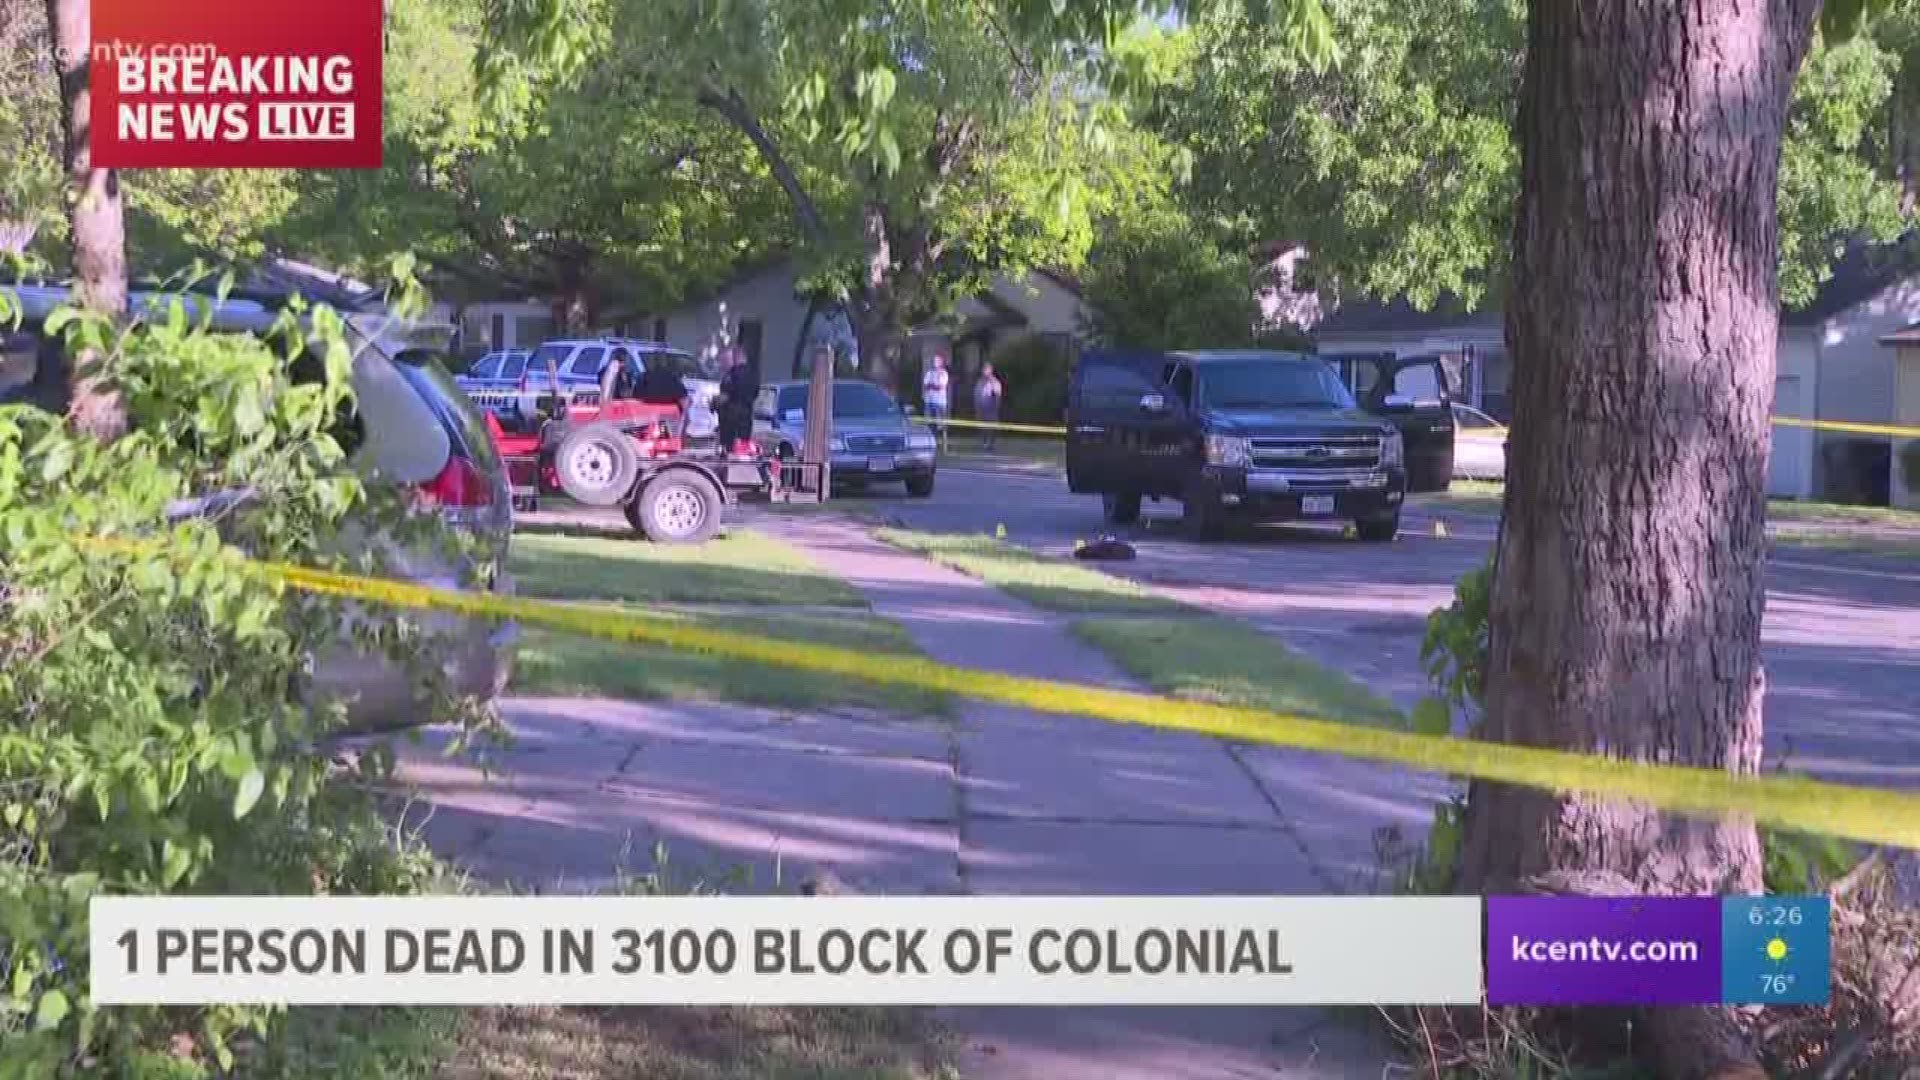 One person died after a shooting Monday afternoon in the 3100 block of Colonial Ave. in Waco.